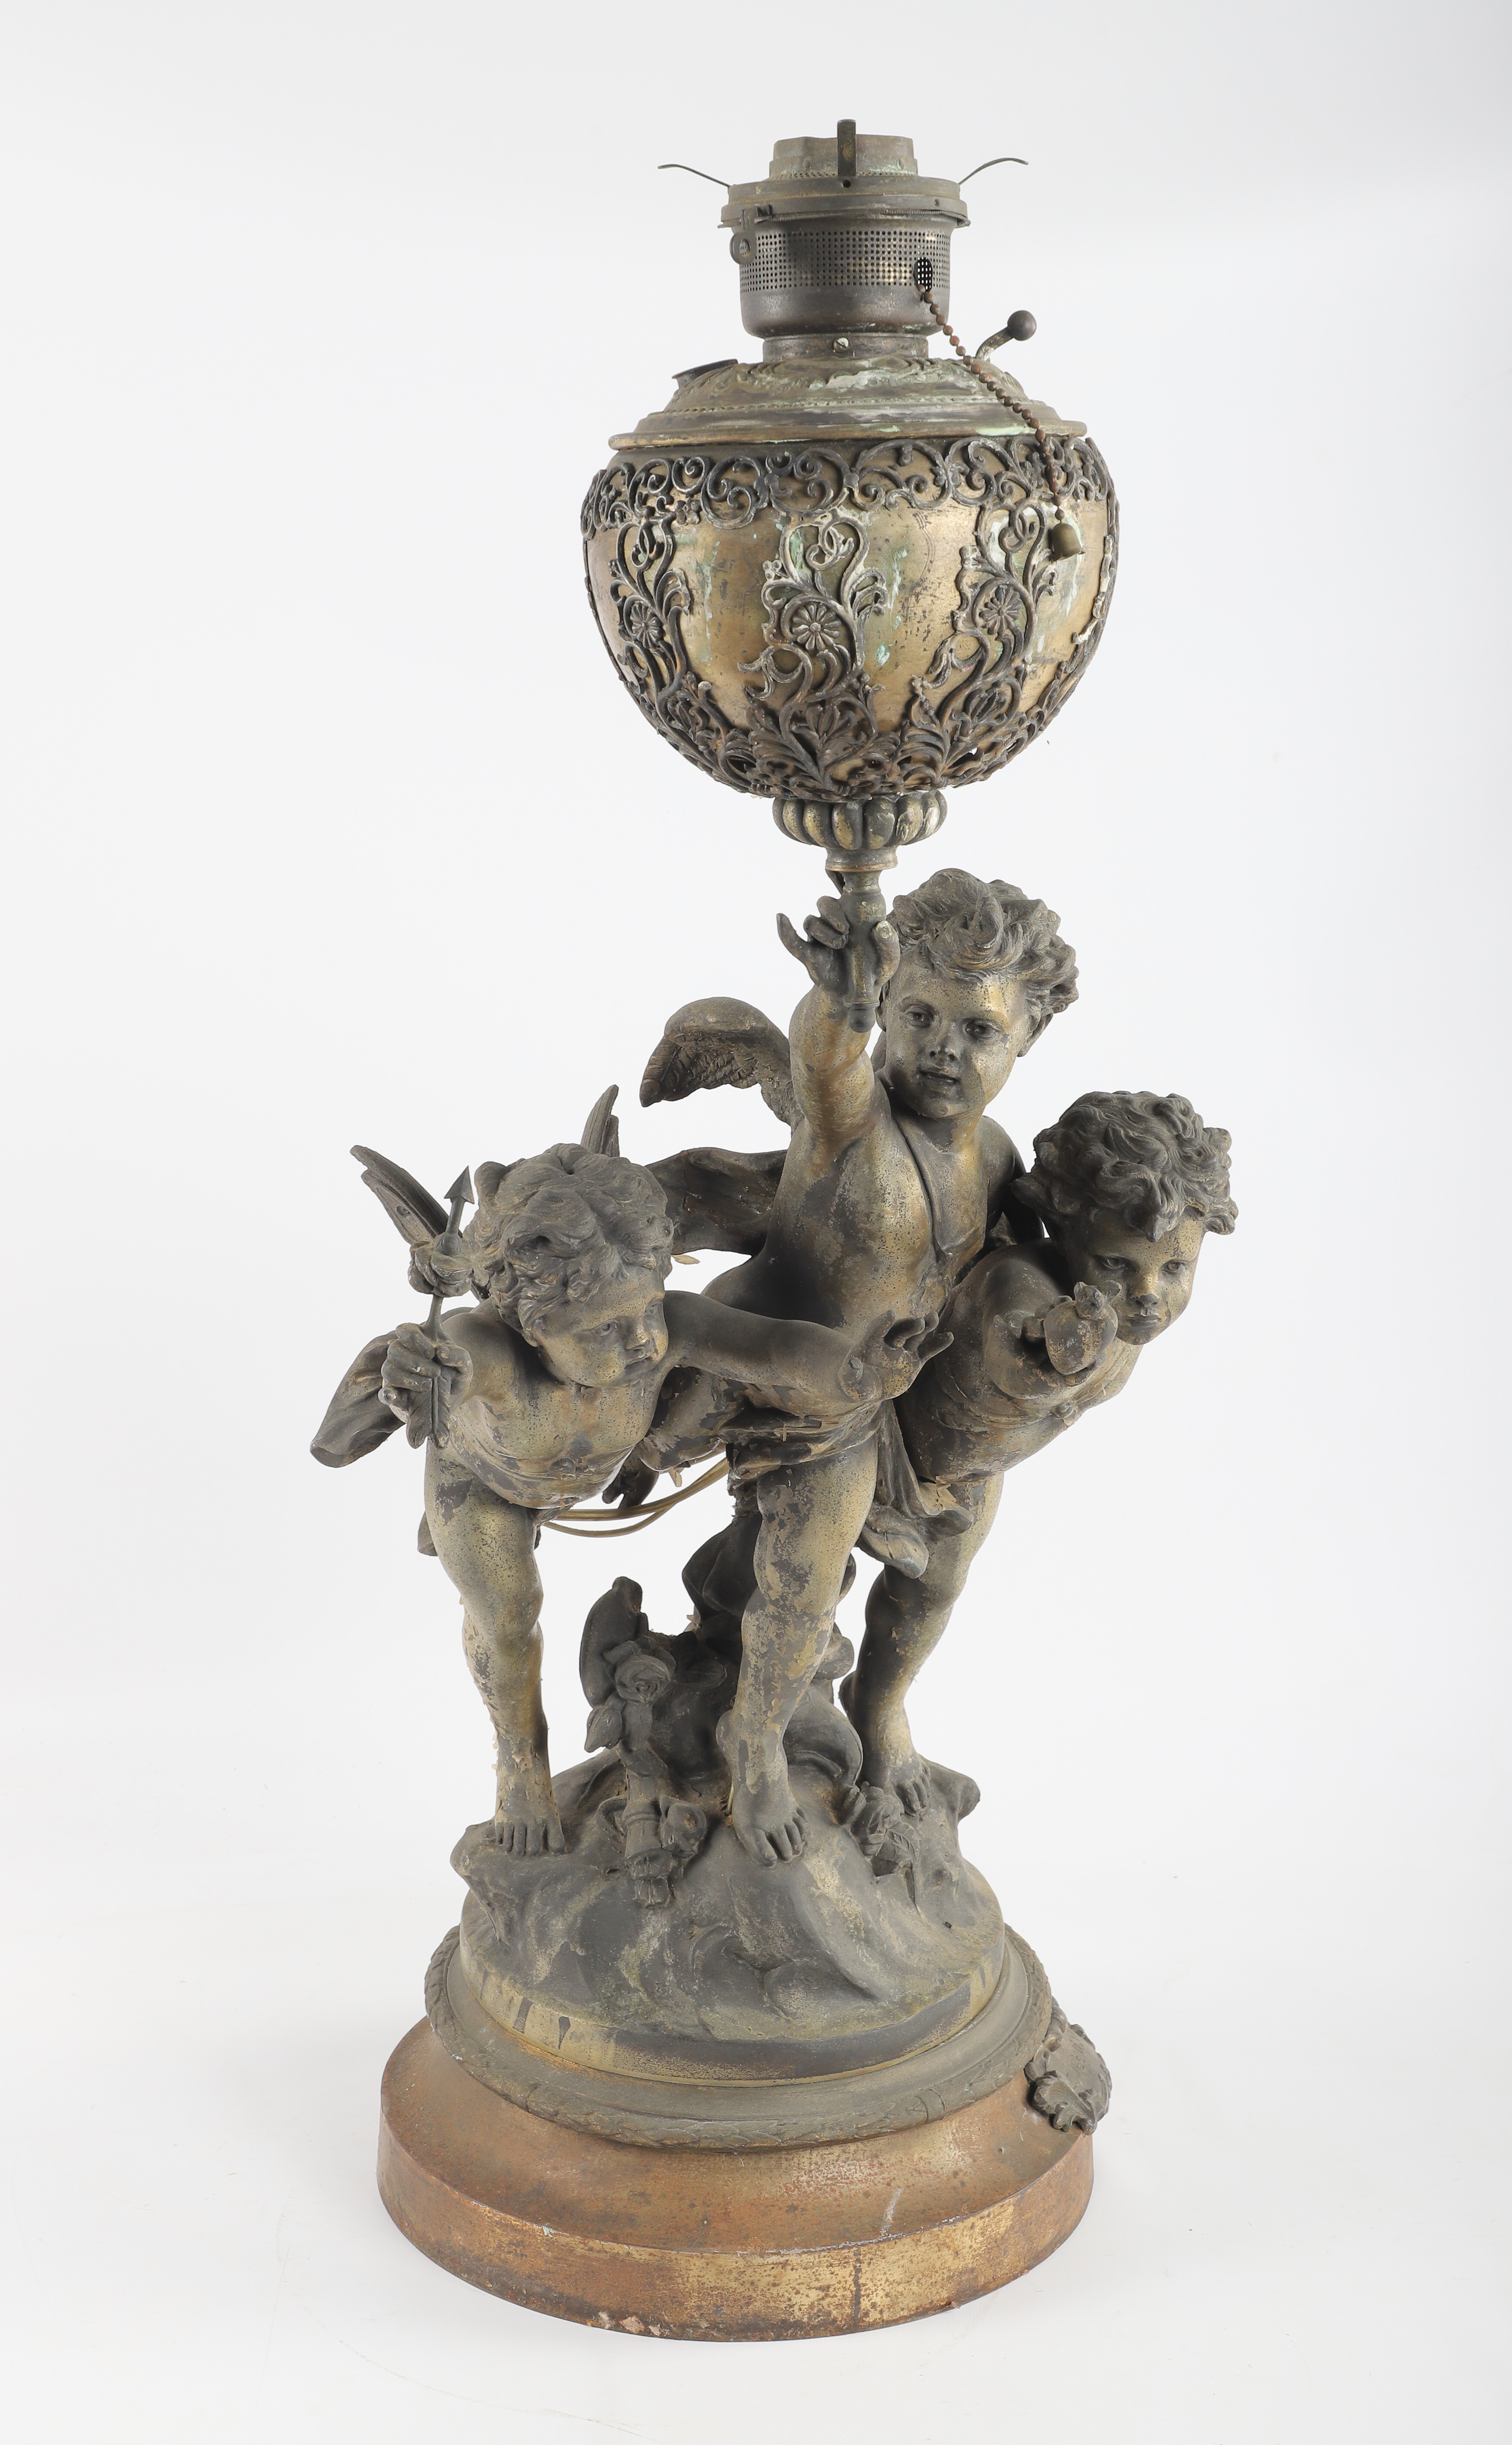 Figural table lamp, "Love's Victory"